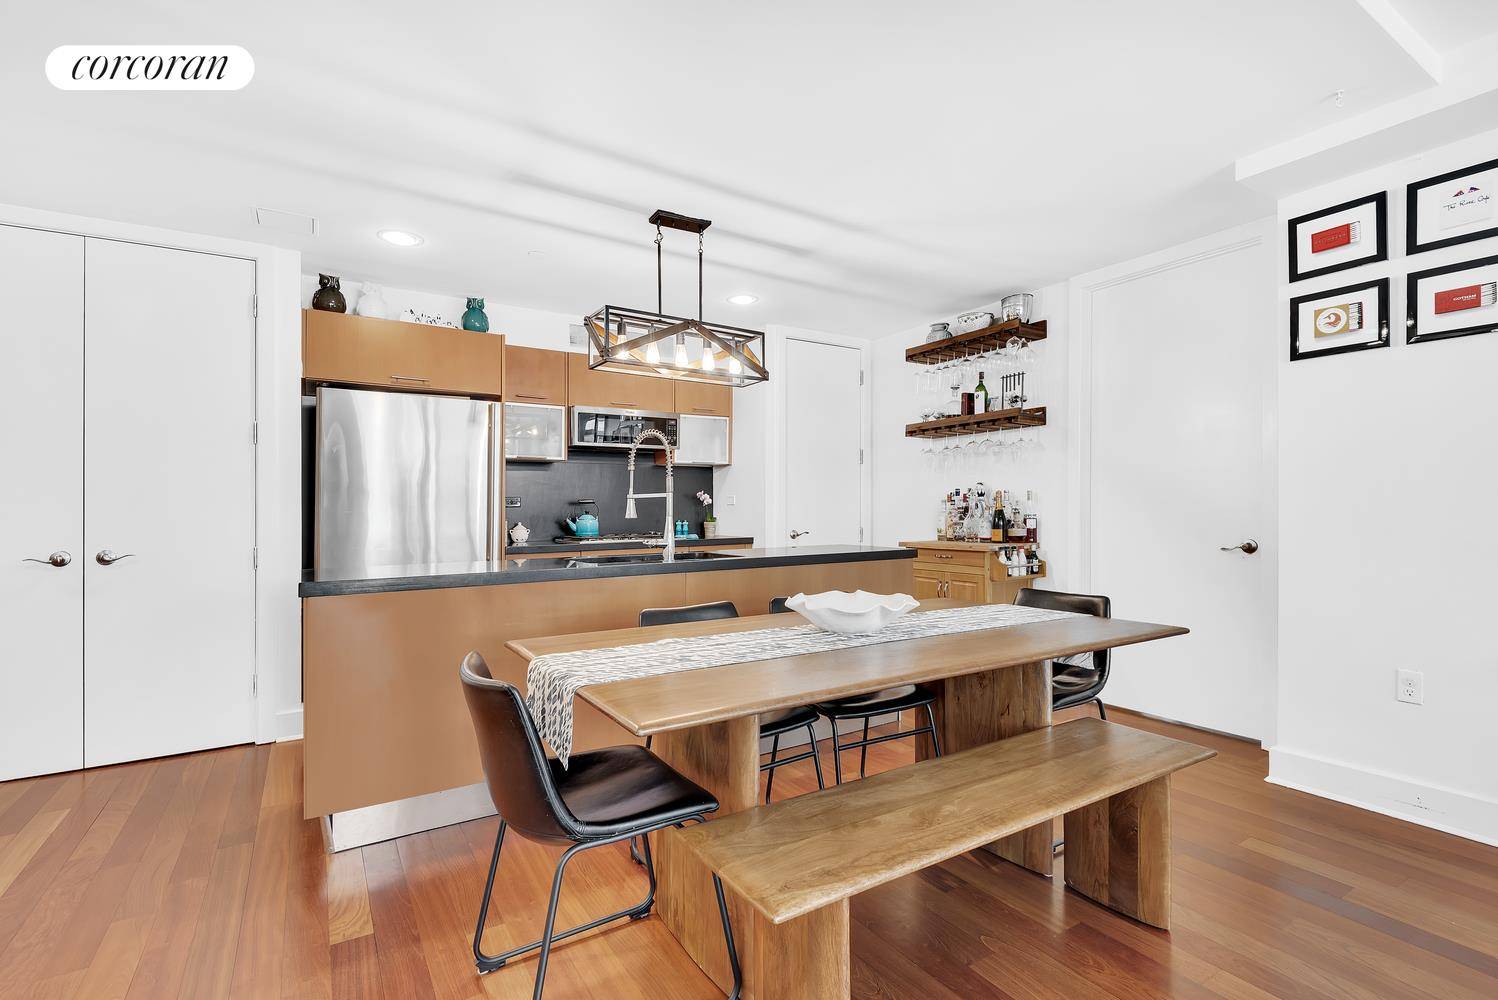 Welcome to your dream home in the heart of vibrant DUMBO !